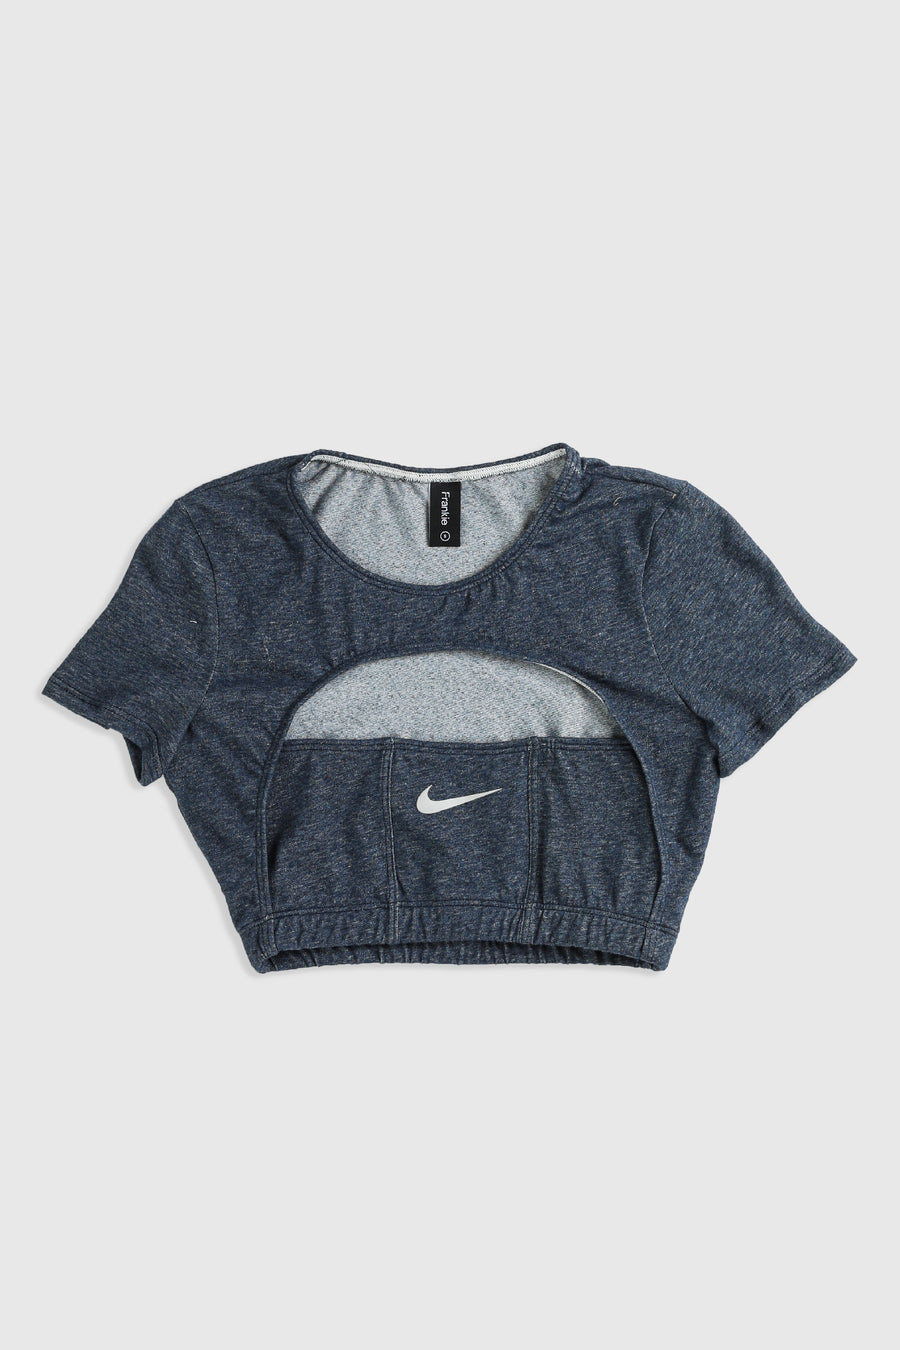 Rework Nike Cut Out Tee - S, M